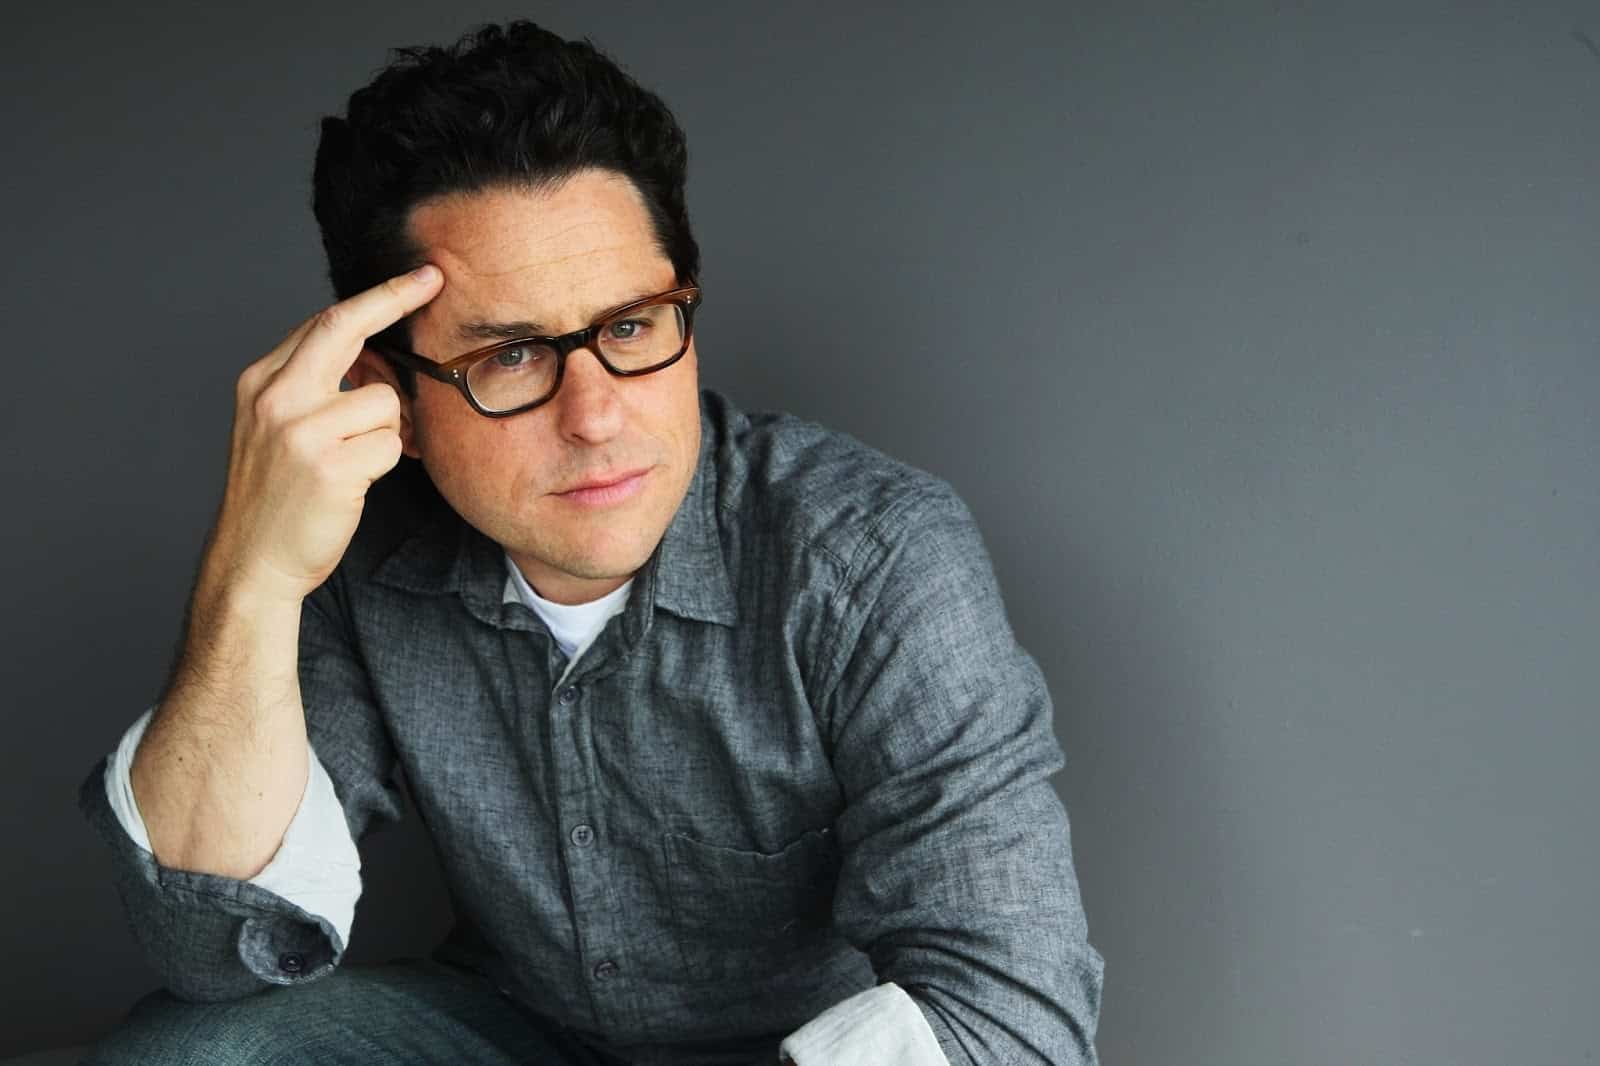 Director J.J. Abrams Confirms He’s “Done” With Star Wars